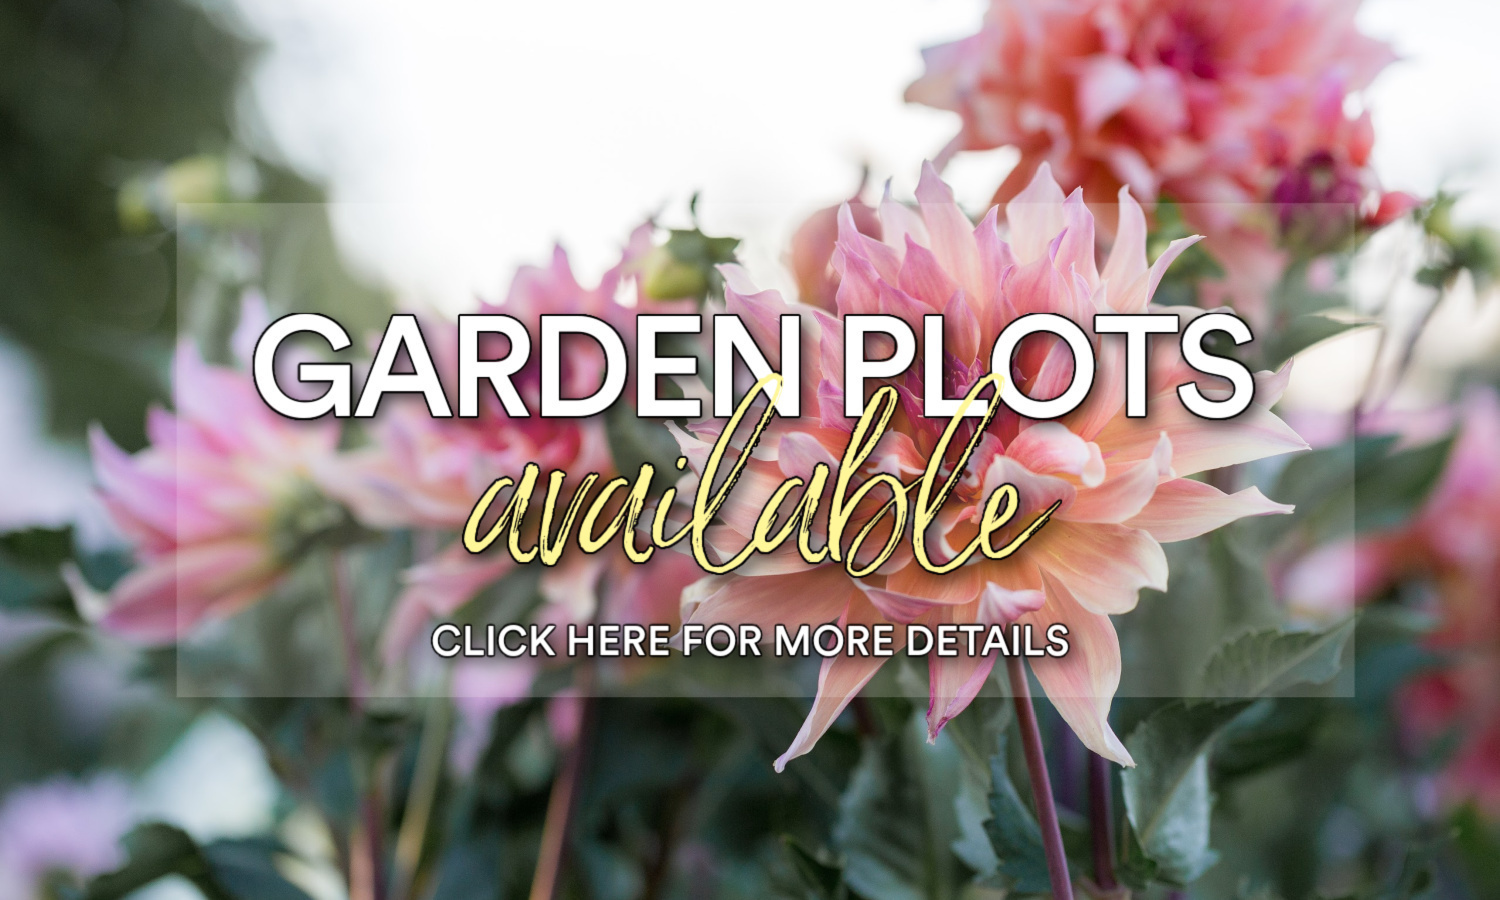 garden plots available click here for more details